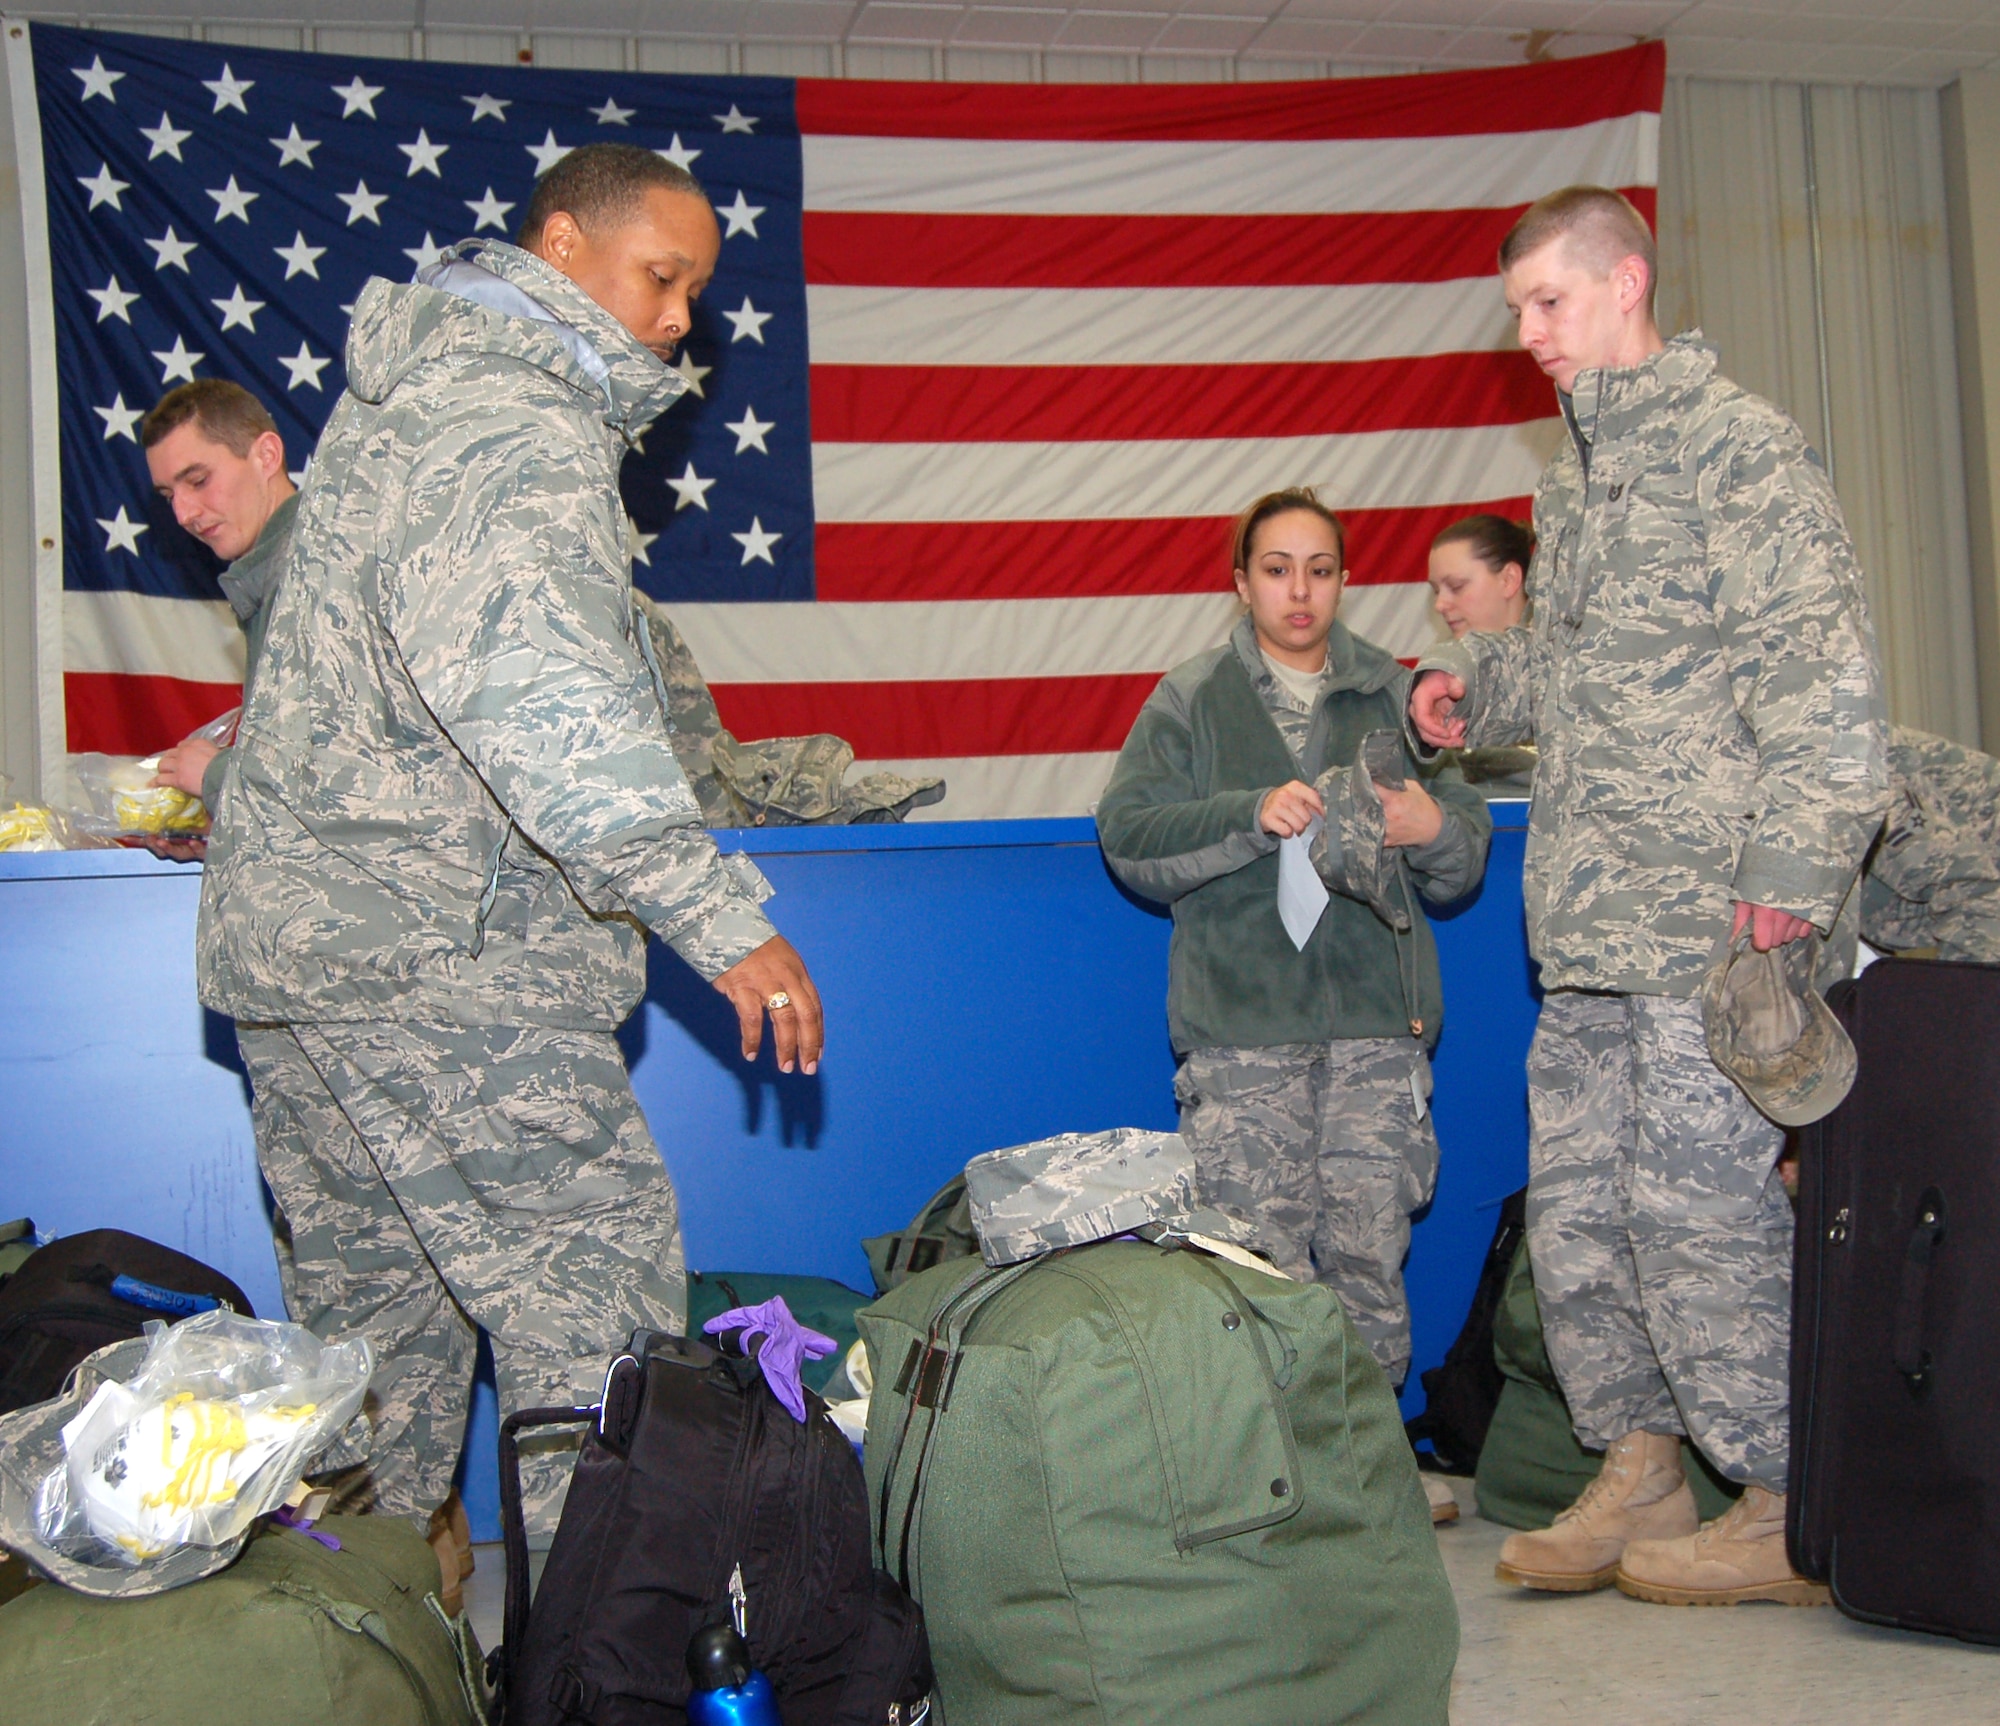 Staff Sgt. Willie Lennon, a services journeyman with the 103rd Force Support Squadron, accounts for his personal bags and military bags before weighing them on scales to be put on a C-21 aircraft. Tech. Sgt. Chris Jones, training manager for the 103rd Force Support Squadron and assistant team leader for the deployers (far right) ensures all equipment and bags are accounted for. (U.S. Air Force photo by Tech. Sgt. Joshua Mead)